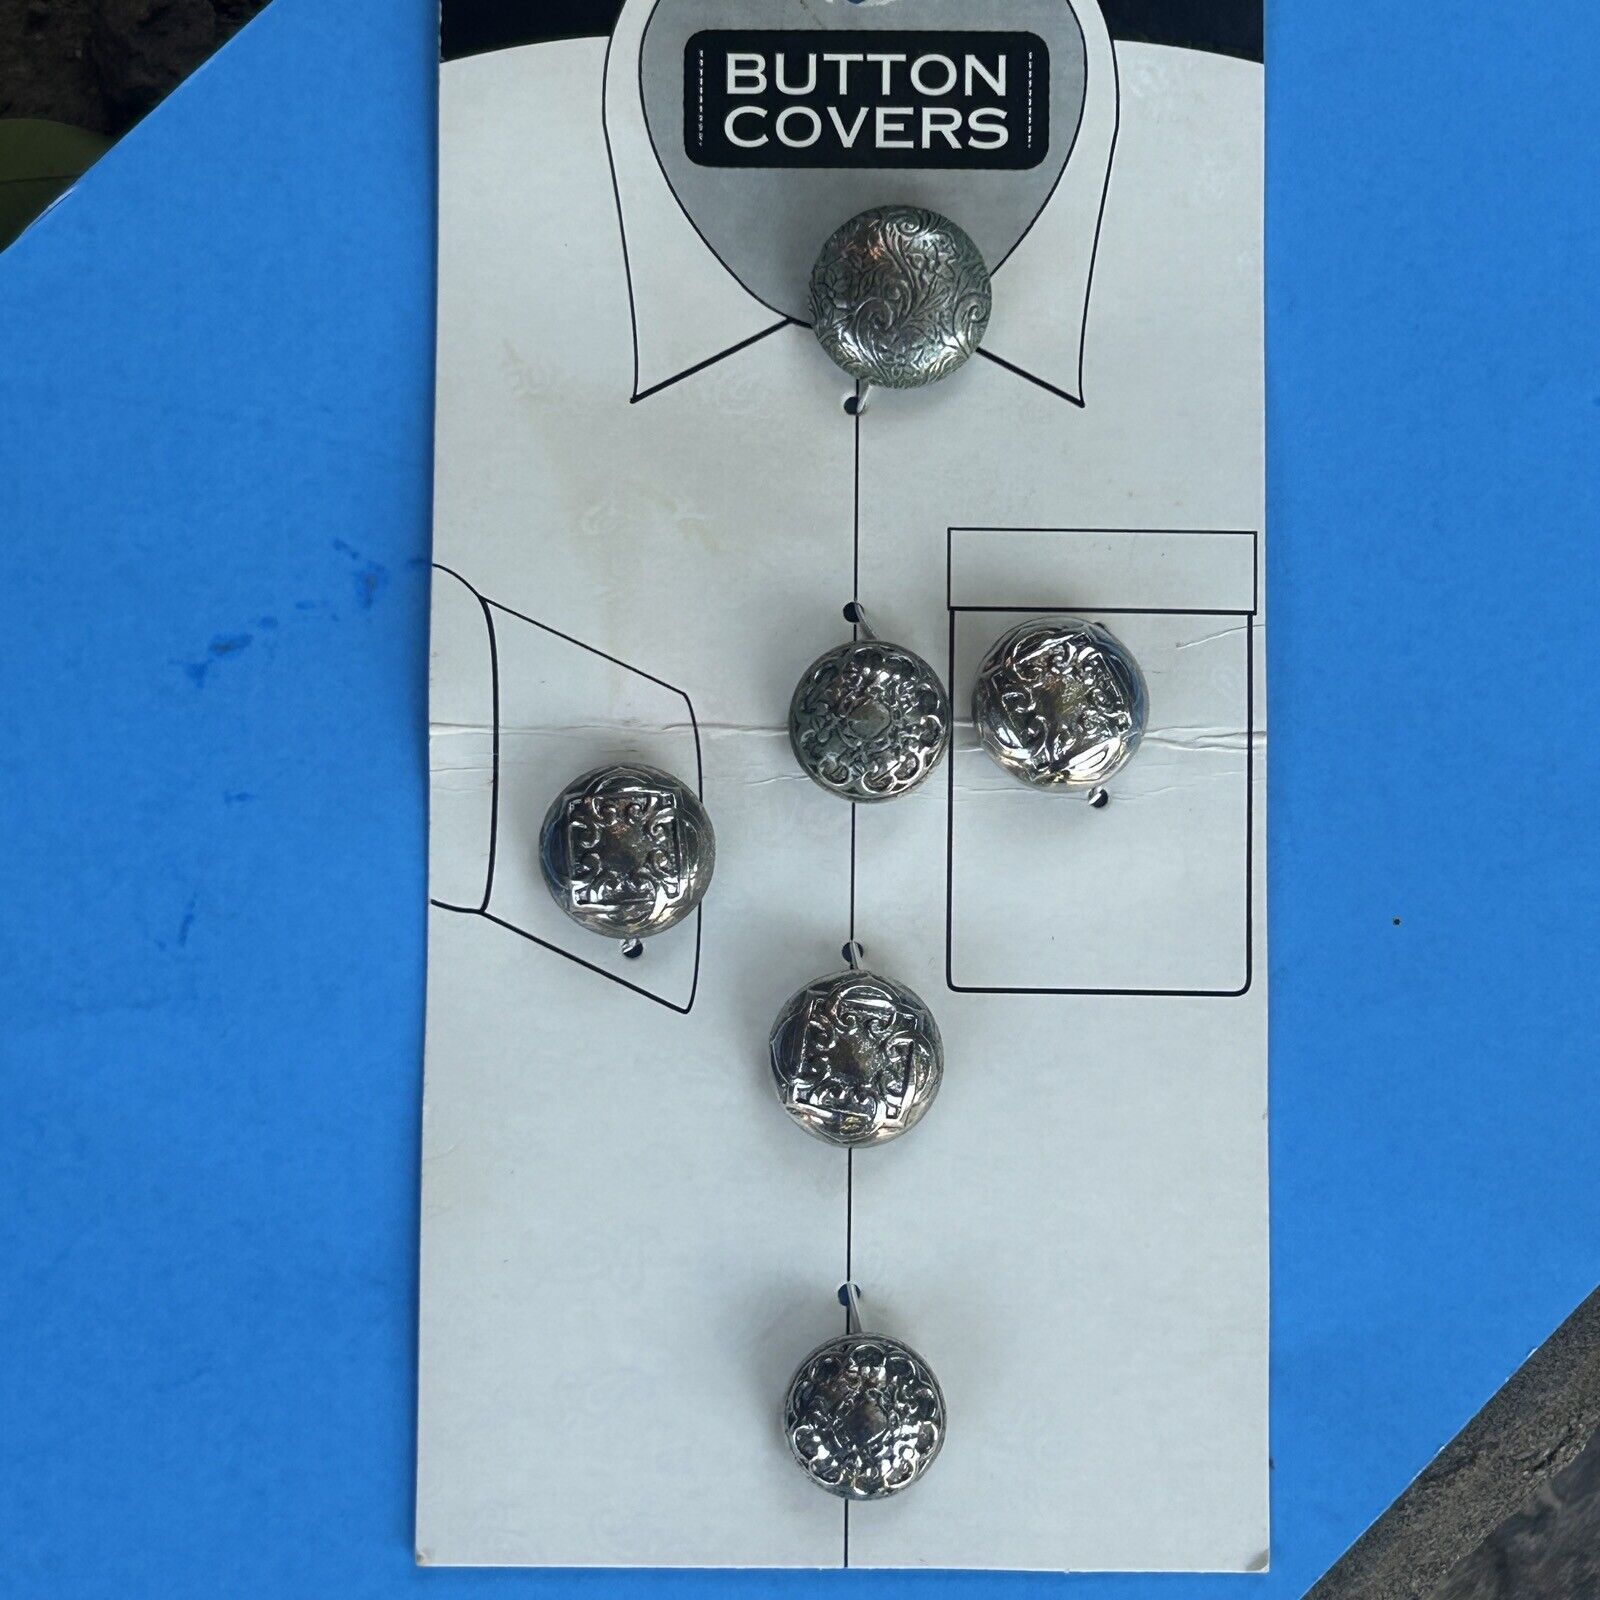 Vintage 80s 90s Silvertone Button Covers Set of 6